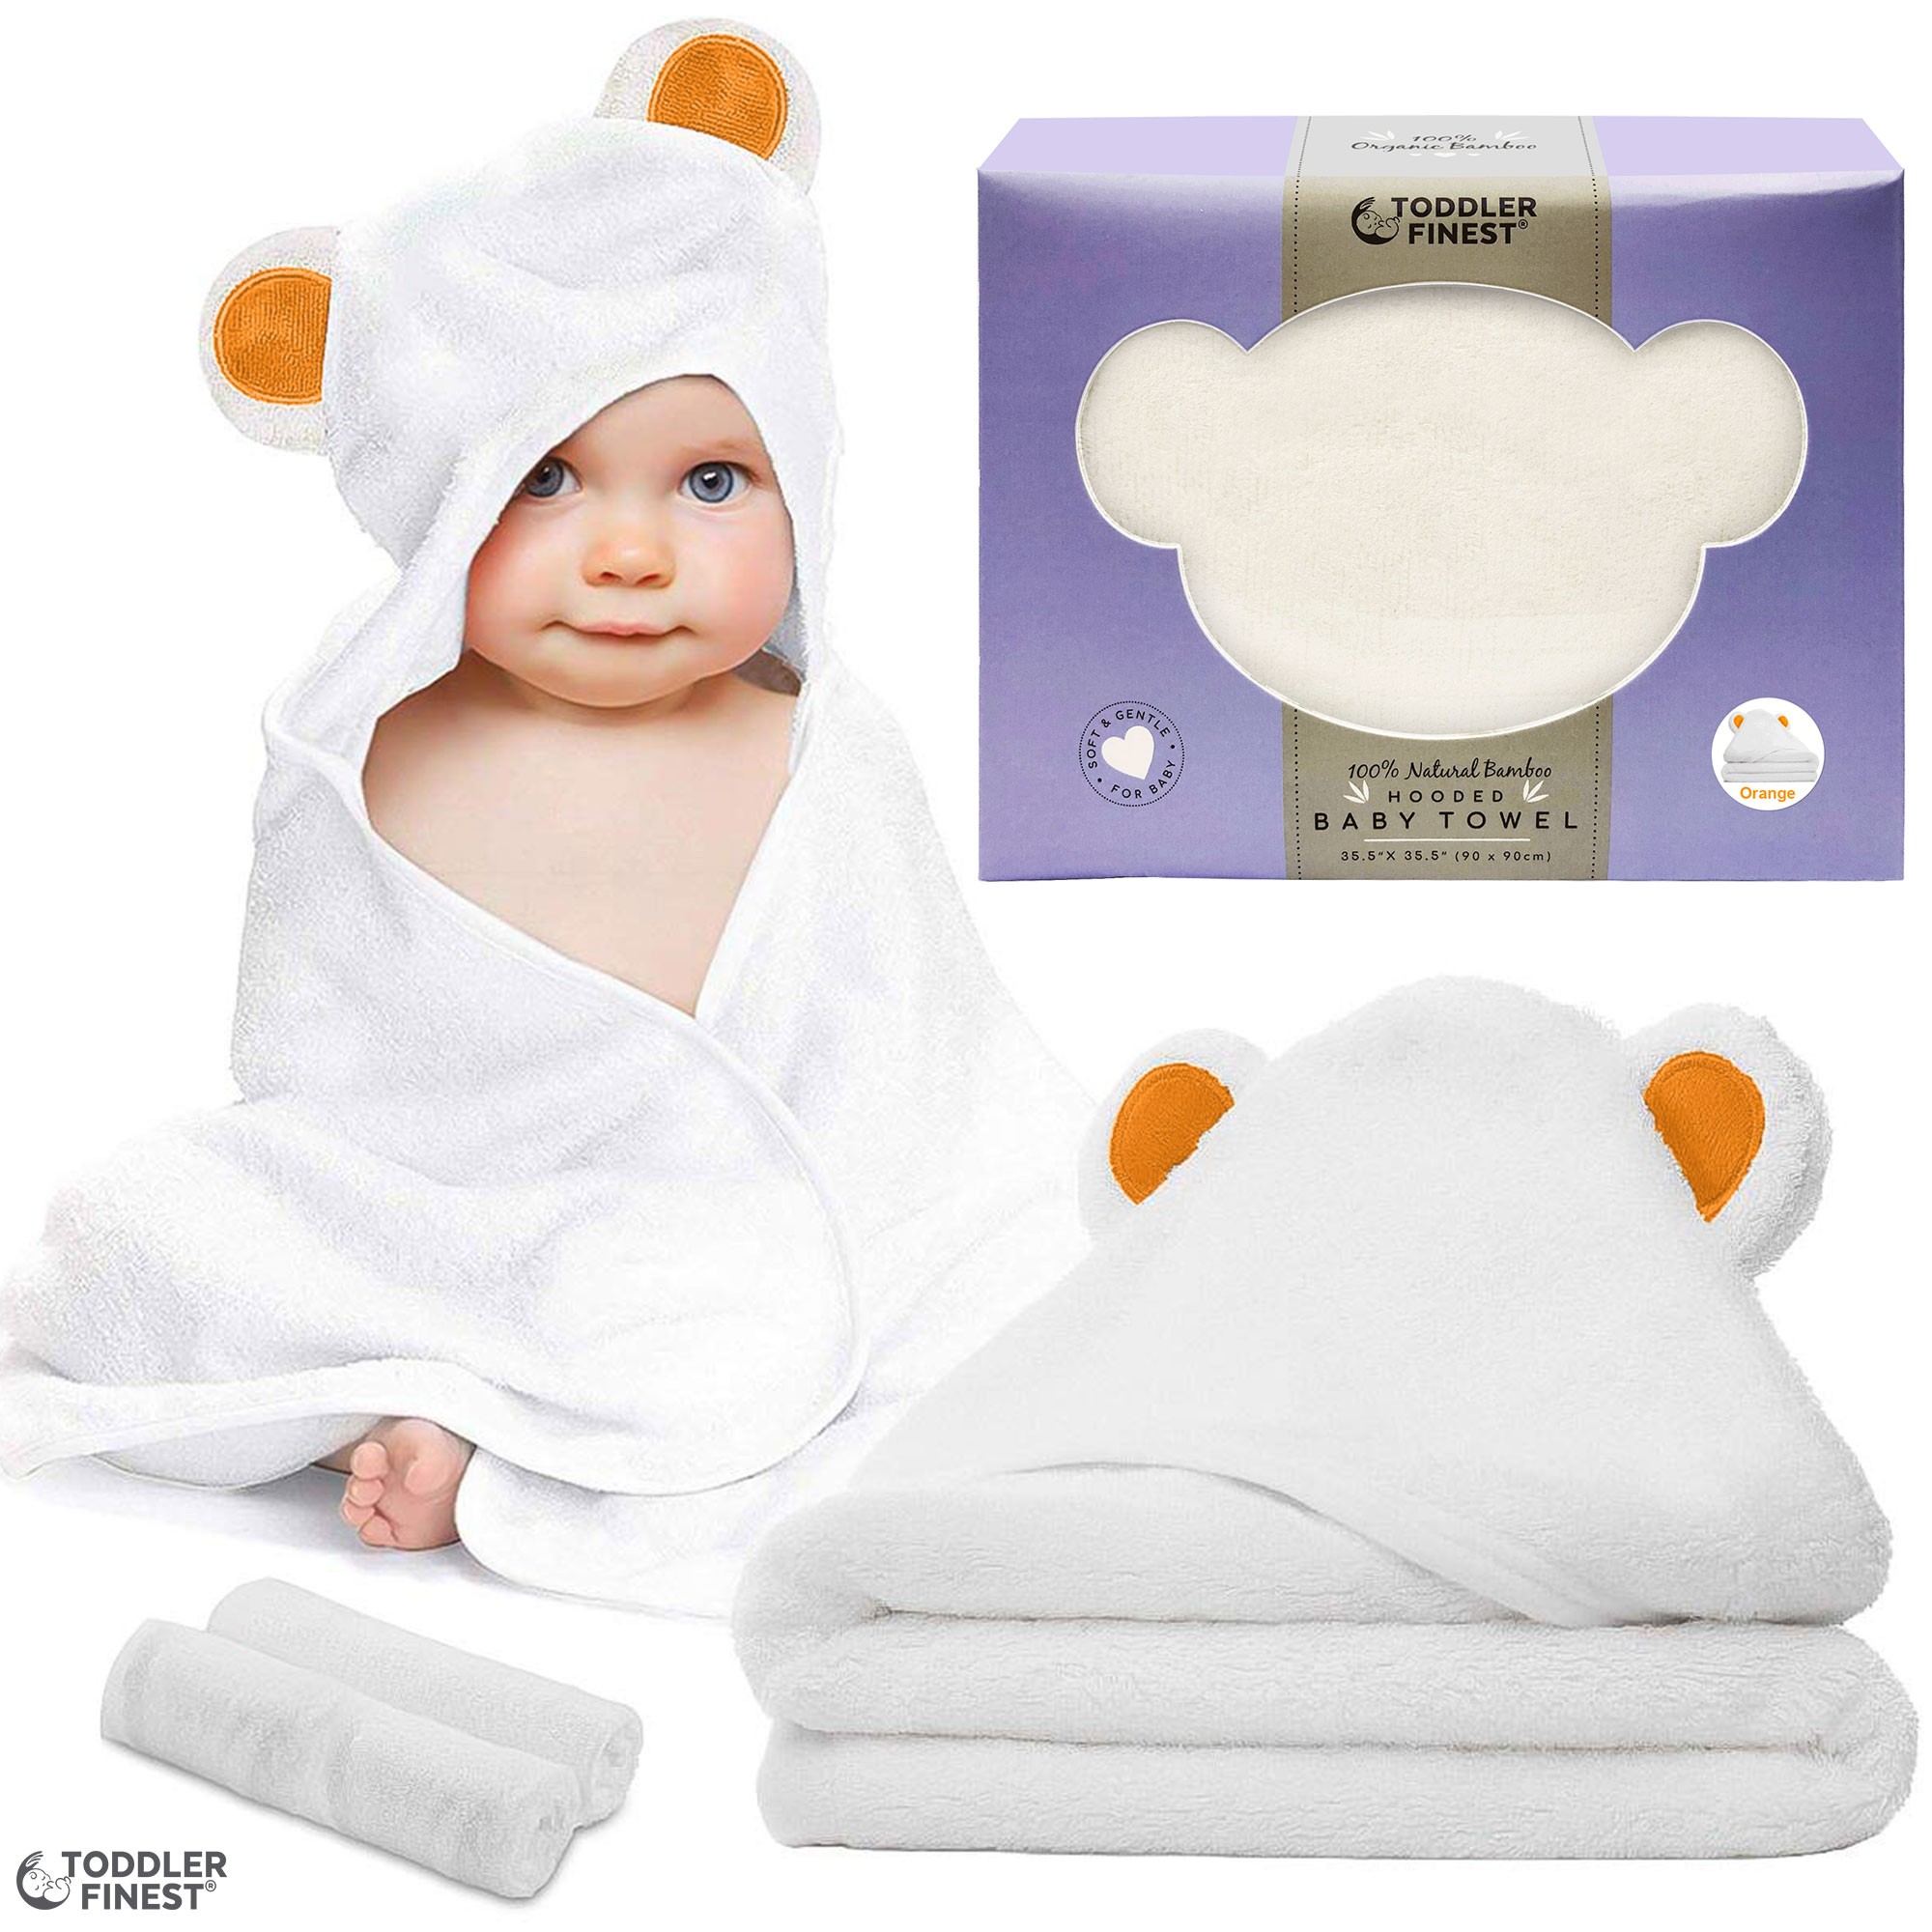 Good Choice Soft and Thick 100% Cotton Bath Set for Kids Girls Boys Infant ad Toddler Baby Hooded Toddler Towel with Bear Ear Pink 